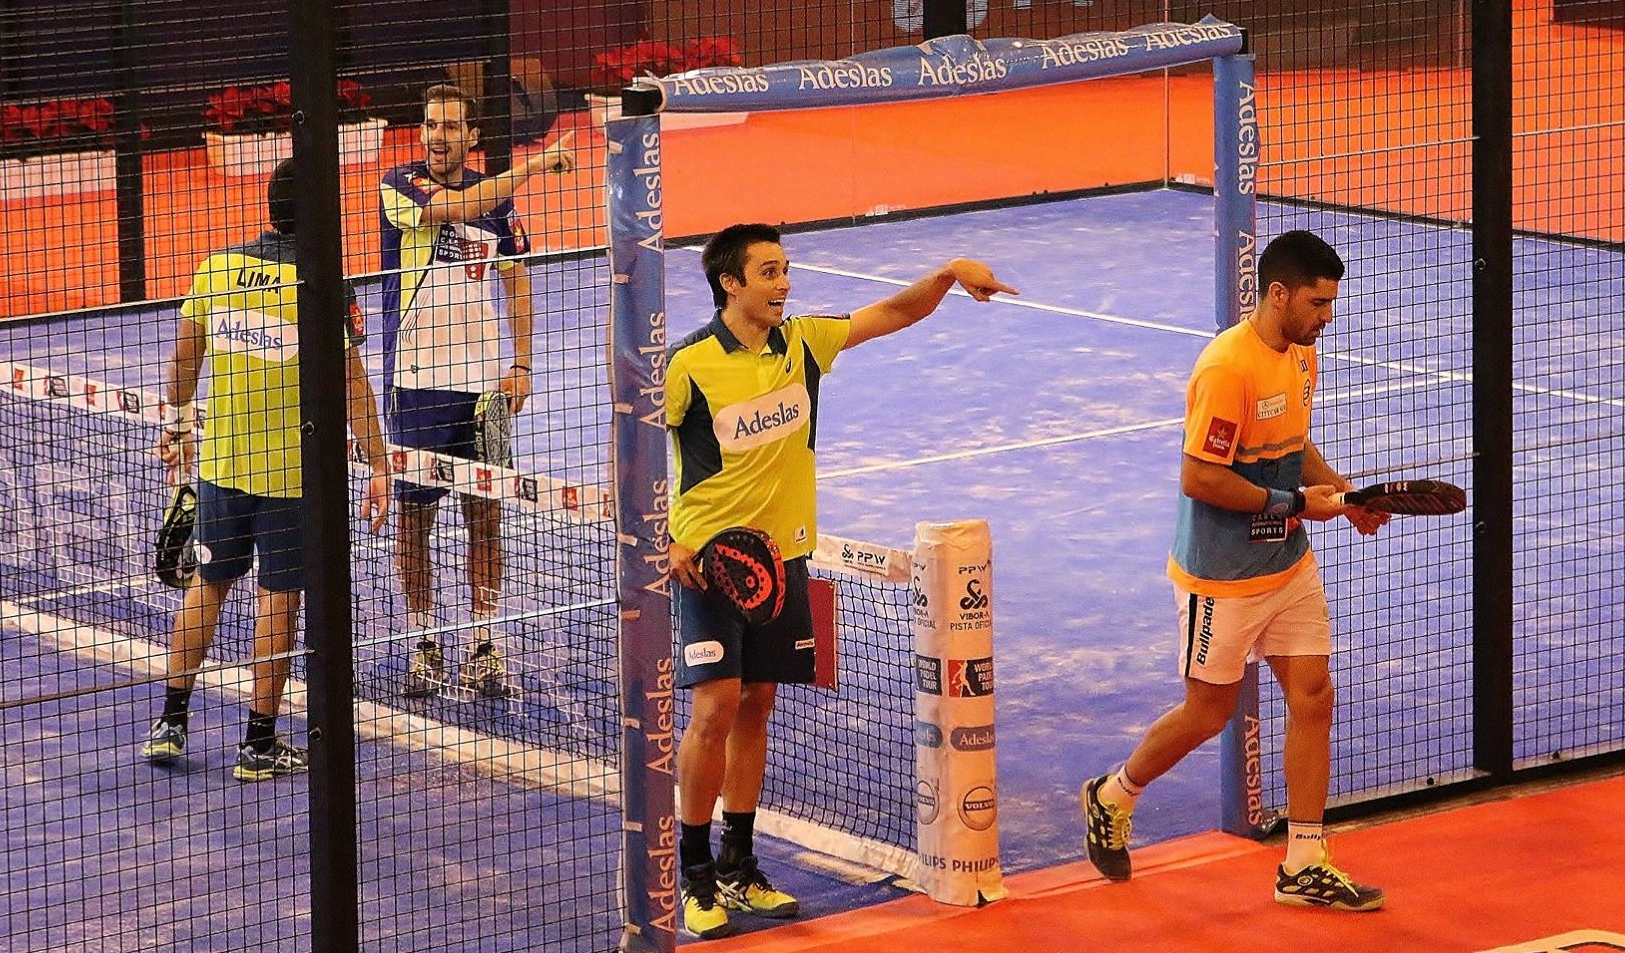 The new version pairs World Padel Tour 2016